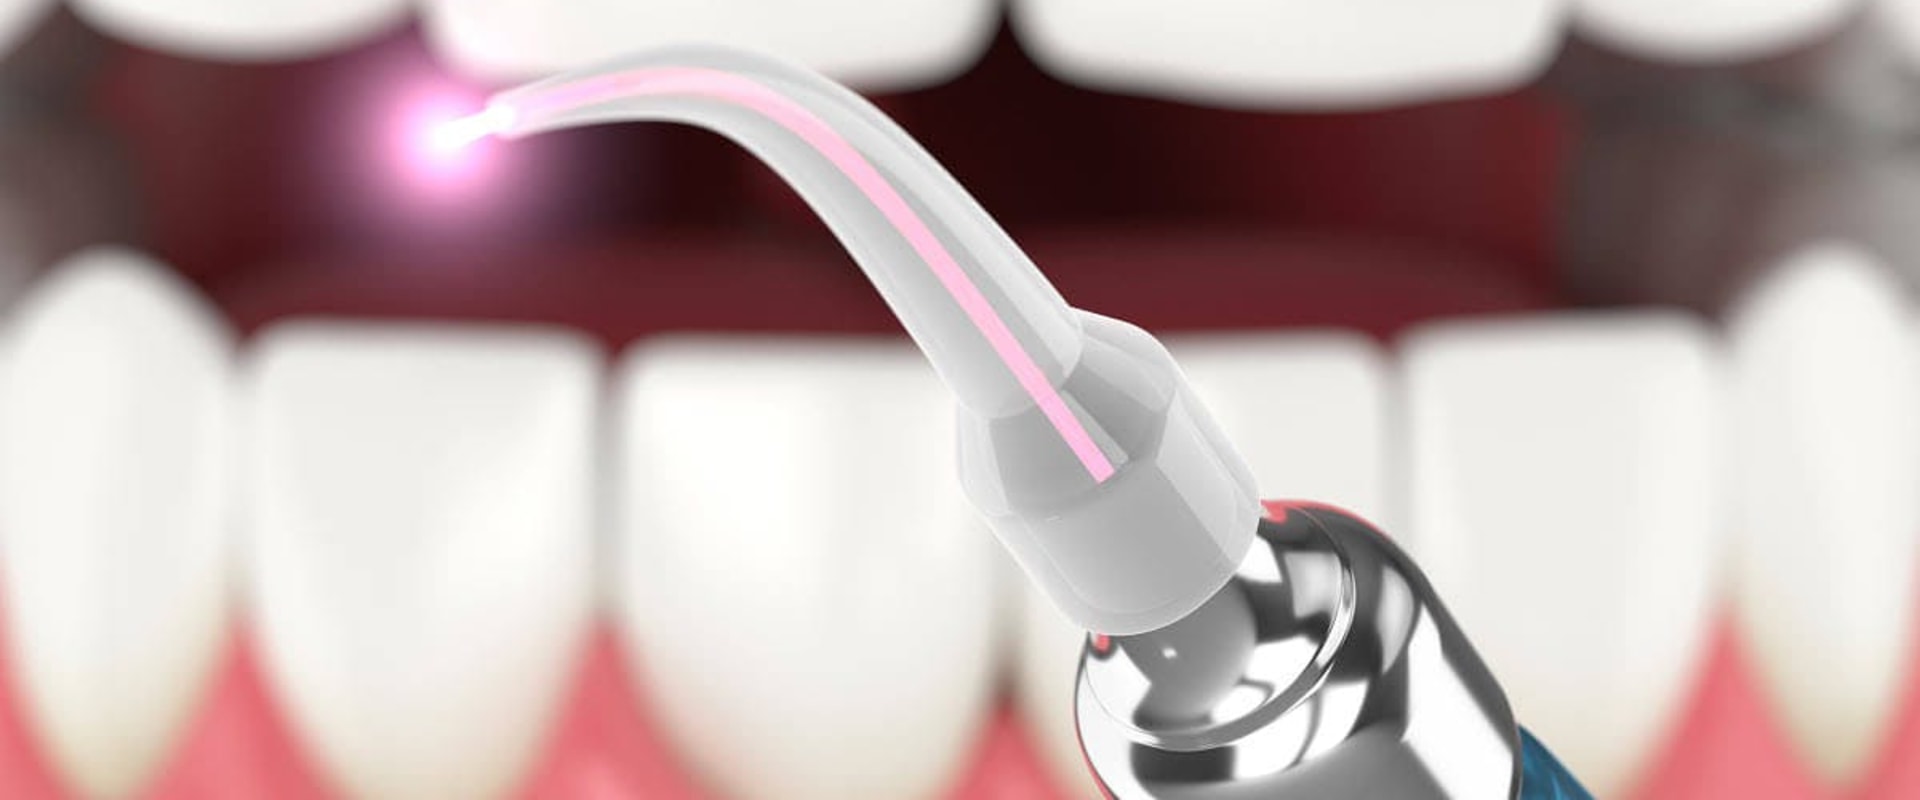 Who regulates the rules for lasers used in dentistry?